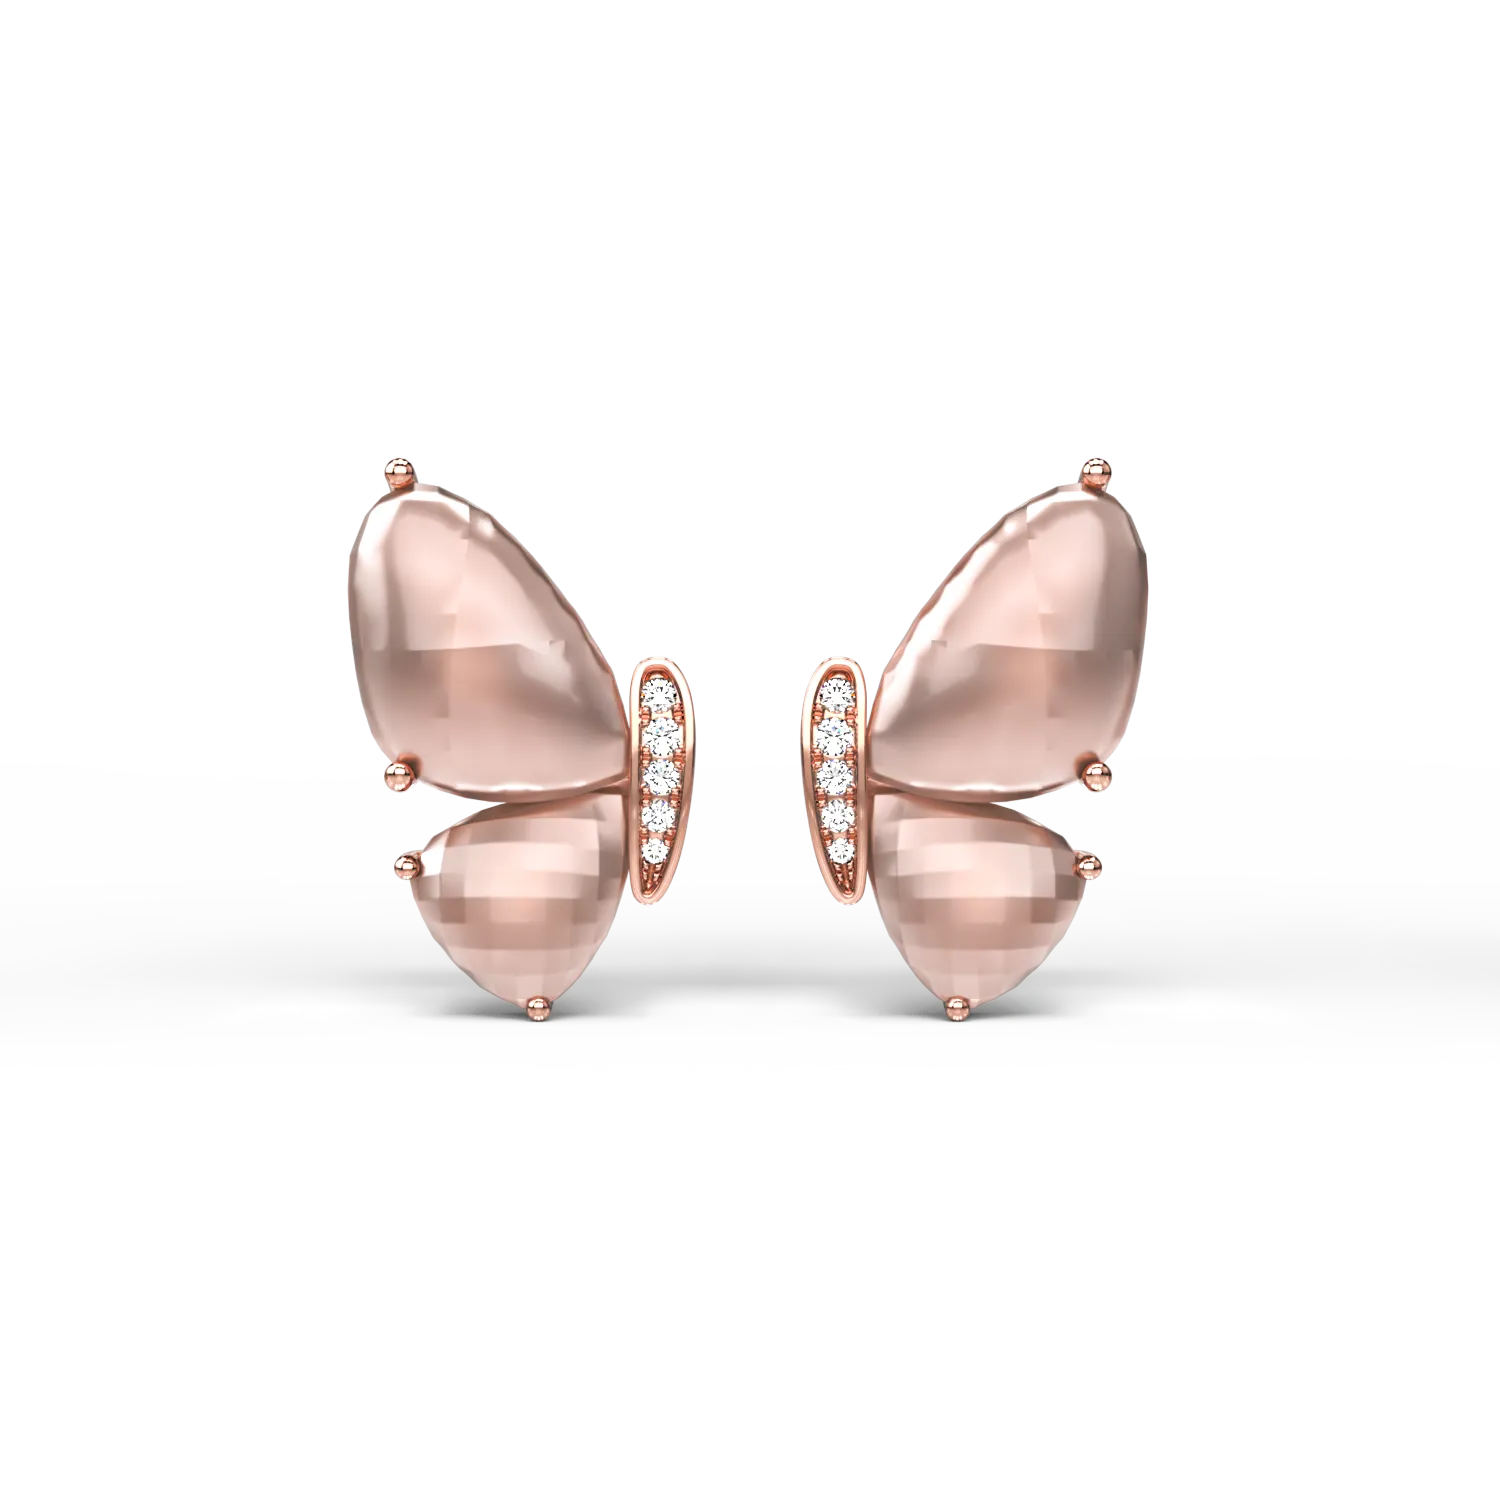 18K rose gold butterflies earrings with 7.7ct rose quartz and 0.06ct diamonds